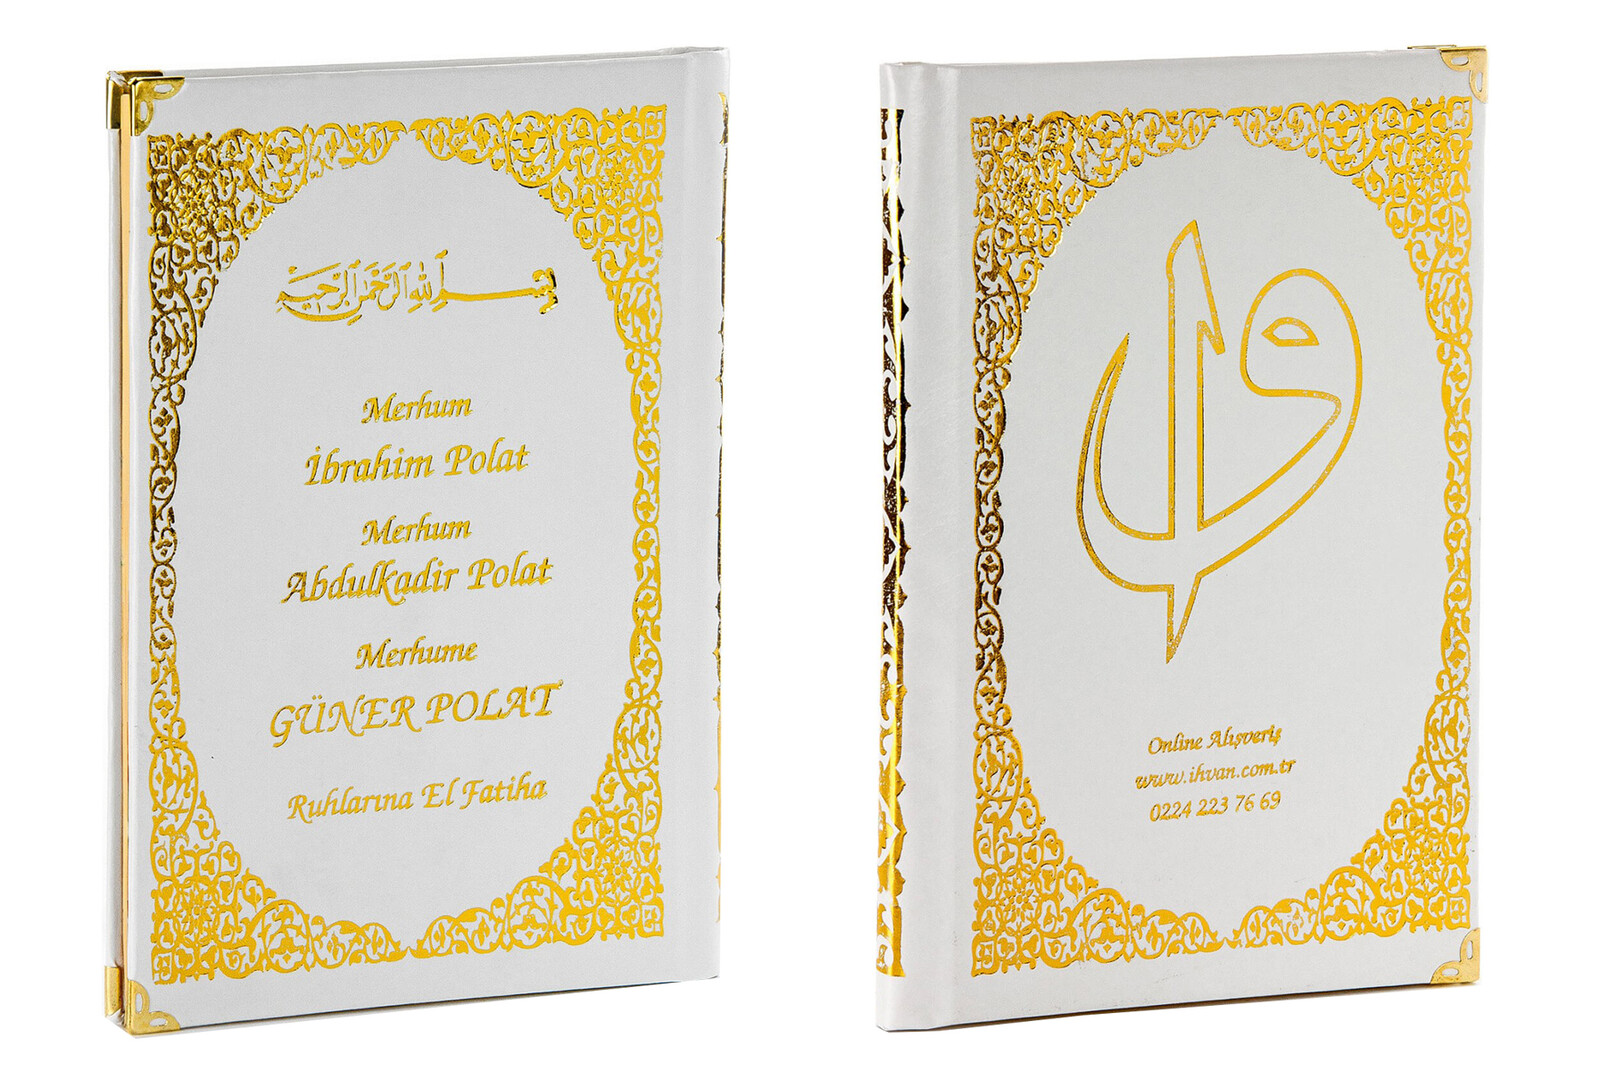 Name Printed Hardlied Yasin Book - Medium Size - 128 Pages - White Color - Religious Gift